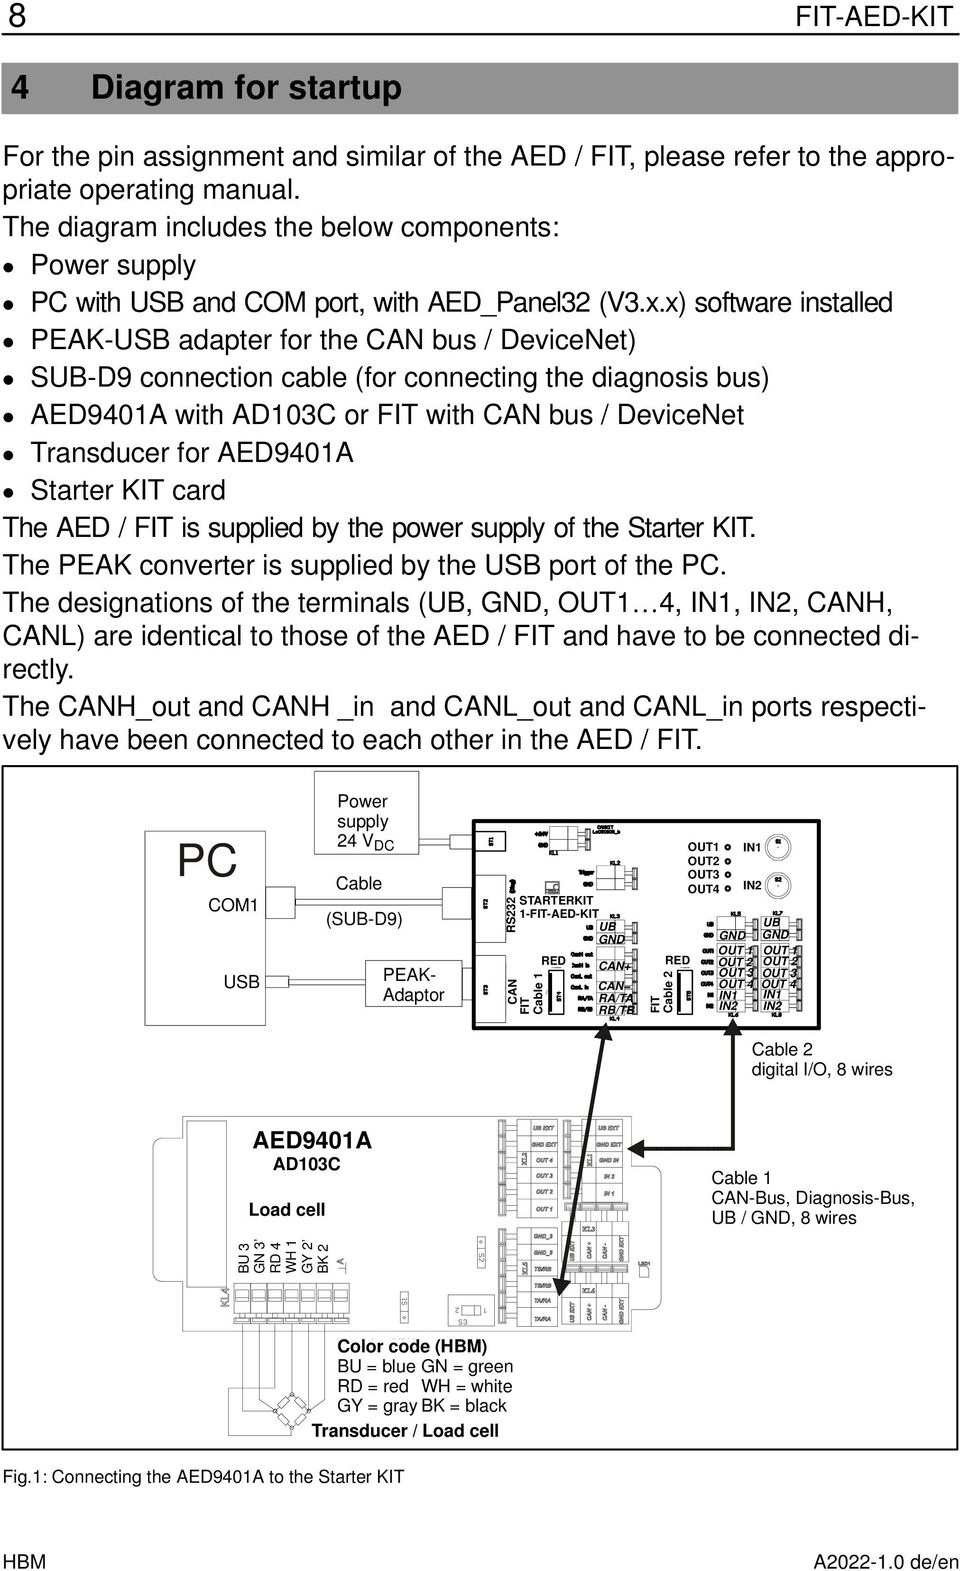 x) software installed PEAK-USB adapter for the CAN bus / evicenet) S-9 connection cable (for connecting the diagnosis bus) AE9401A with A103C or with CAN bus / evicenet Transducer for AE9401A Starter